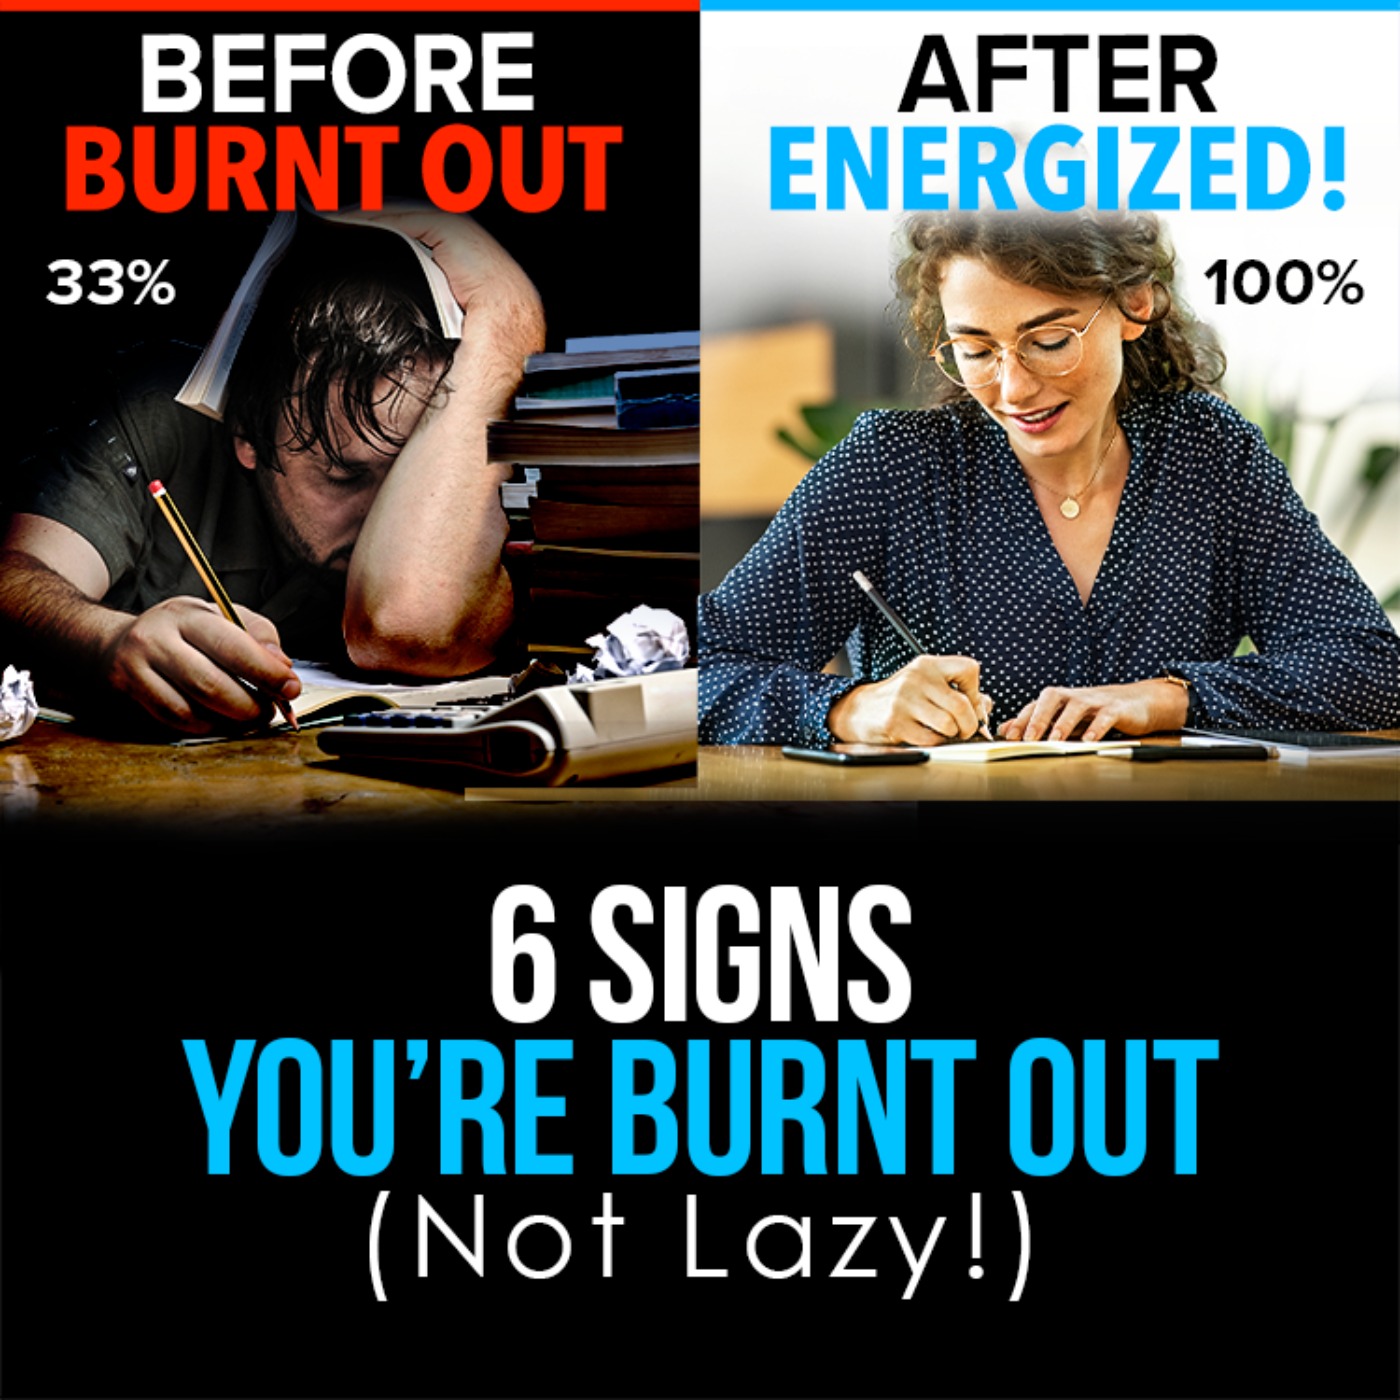 6 Signs You're Burnt Out (NOT Lazy!)